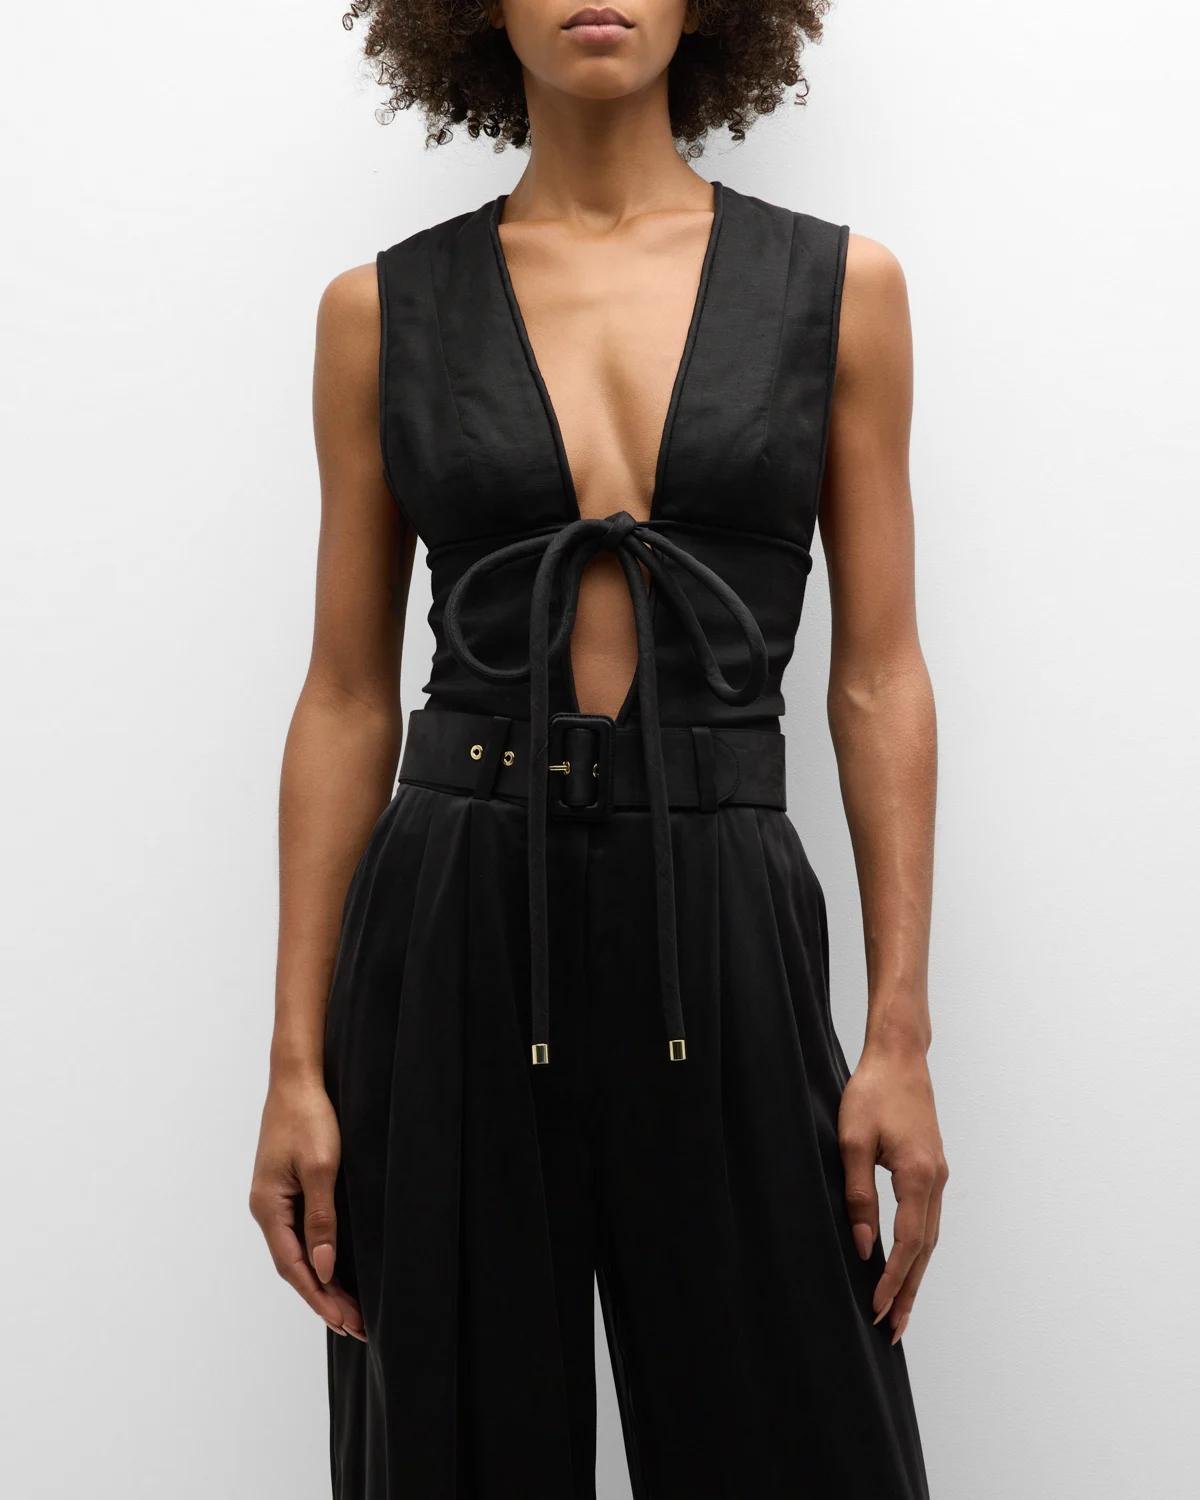 Matchmaker Tie-Front Bow Bodice by ZIMMERMANN